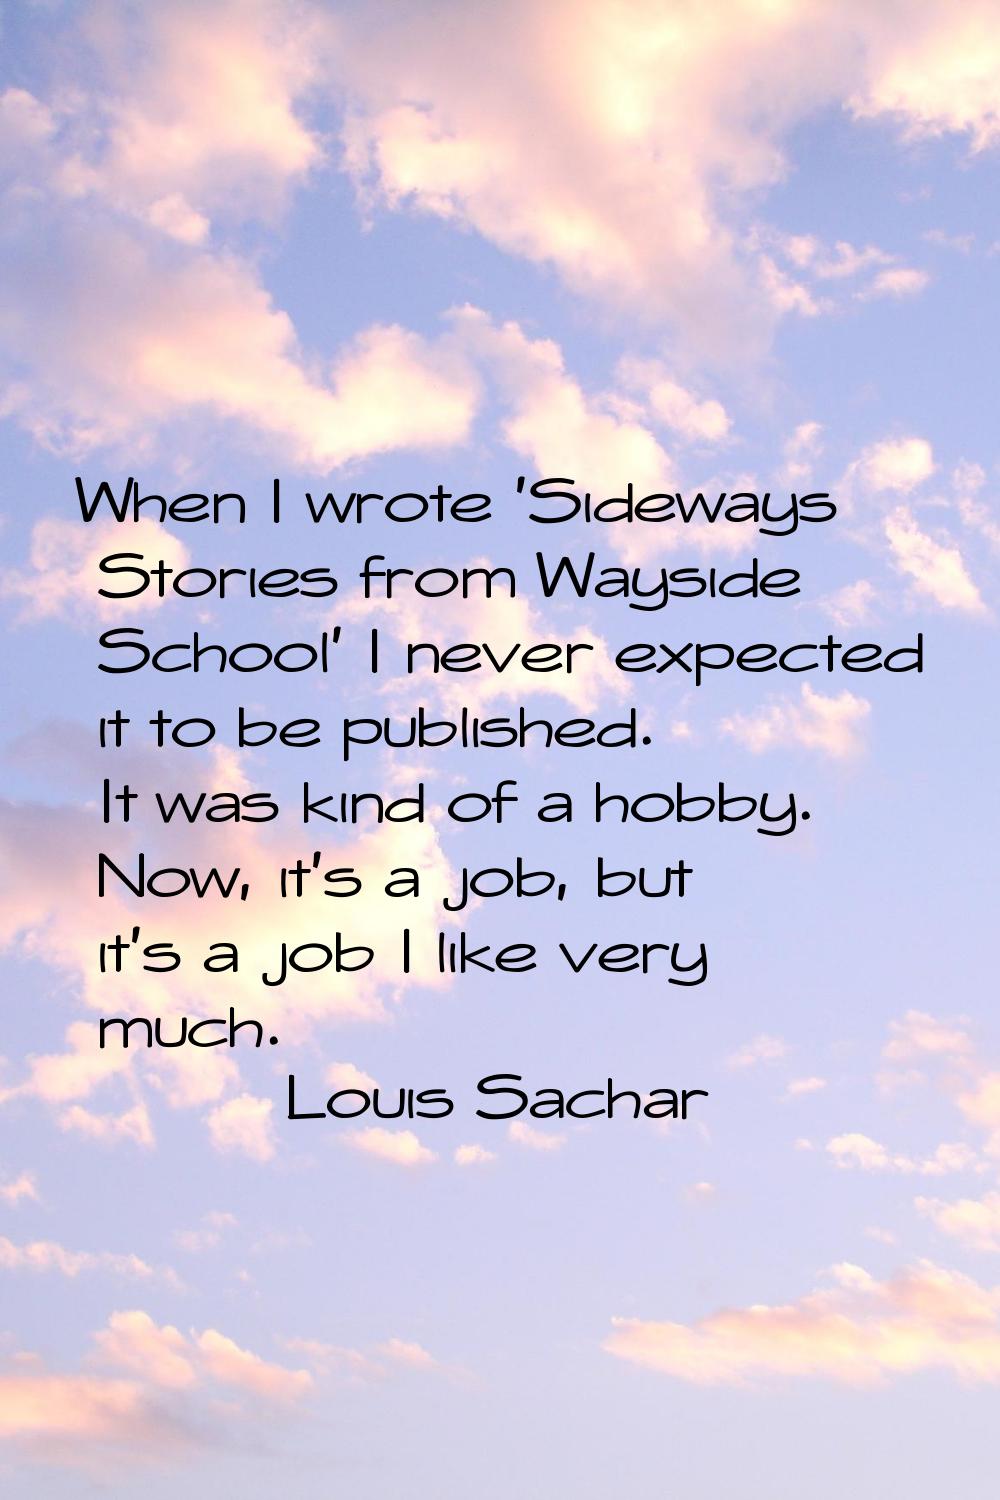 When I wrote 'Sideways Stories from Wayside School' I never expected it to be published. It was kin